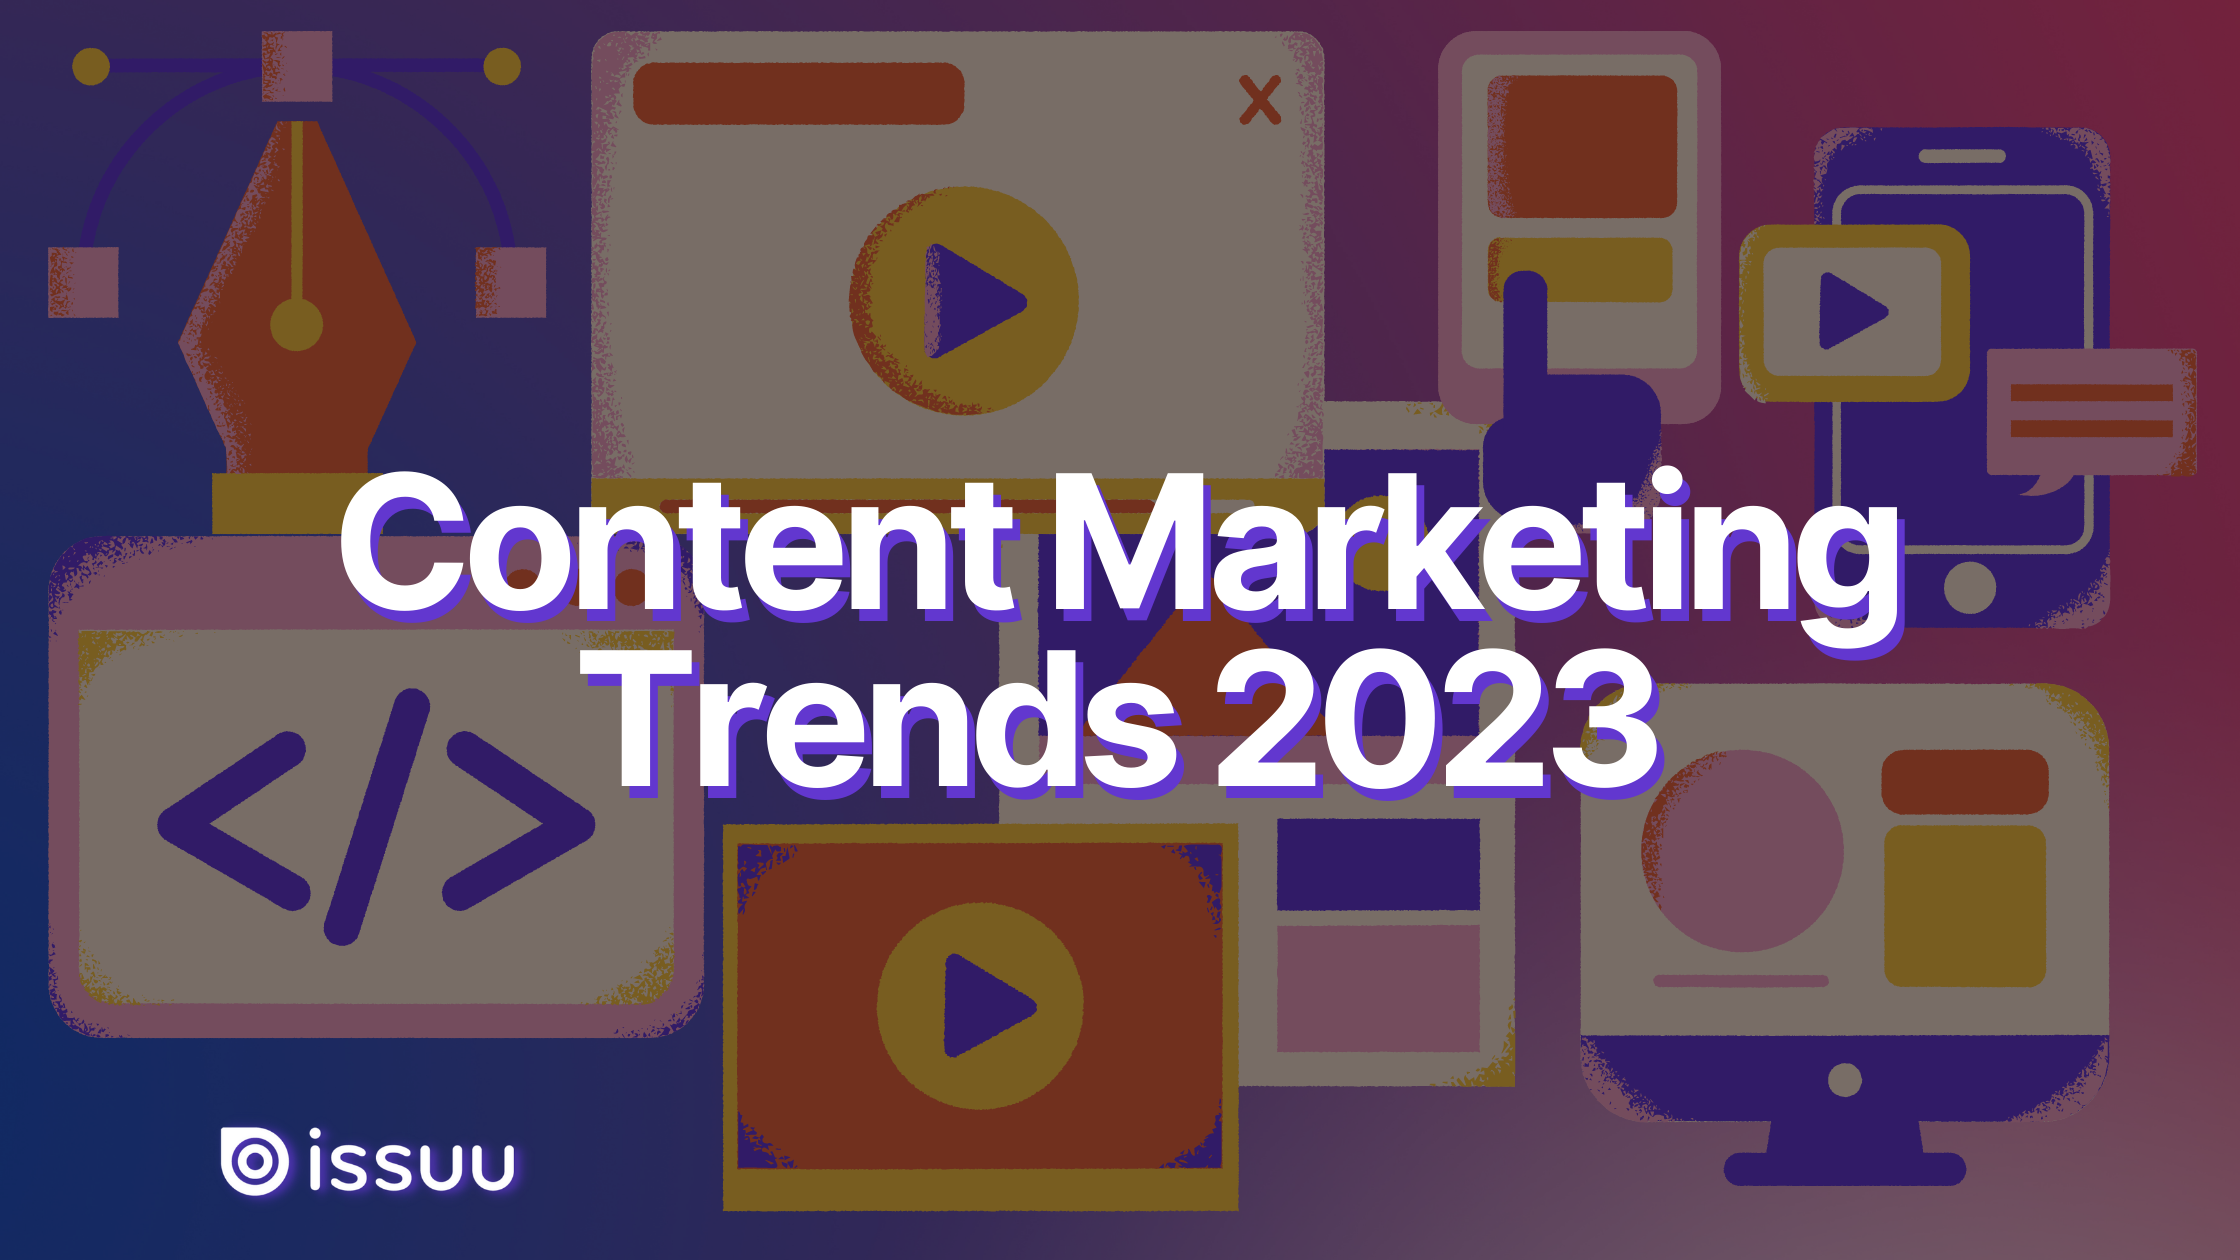 80+ Content Marketing Predictions and Trends for Success in 2023